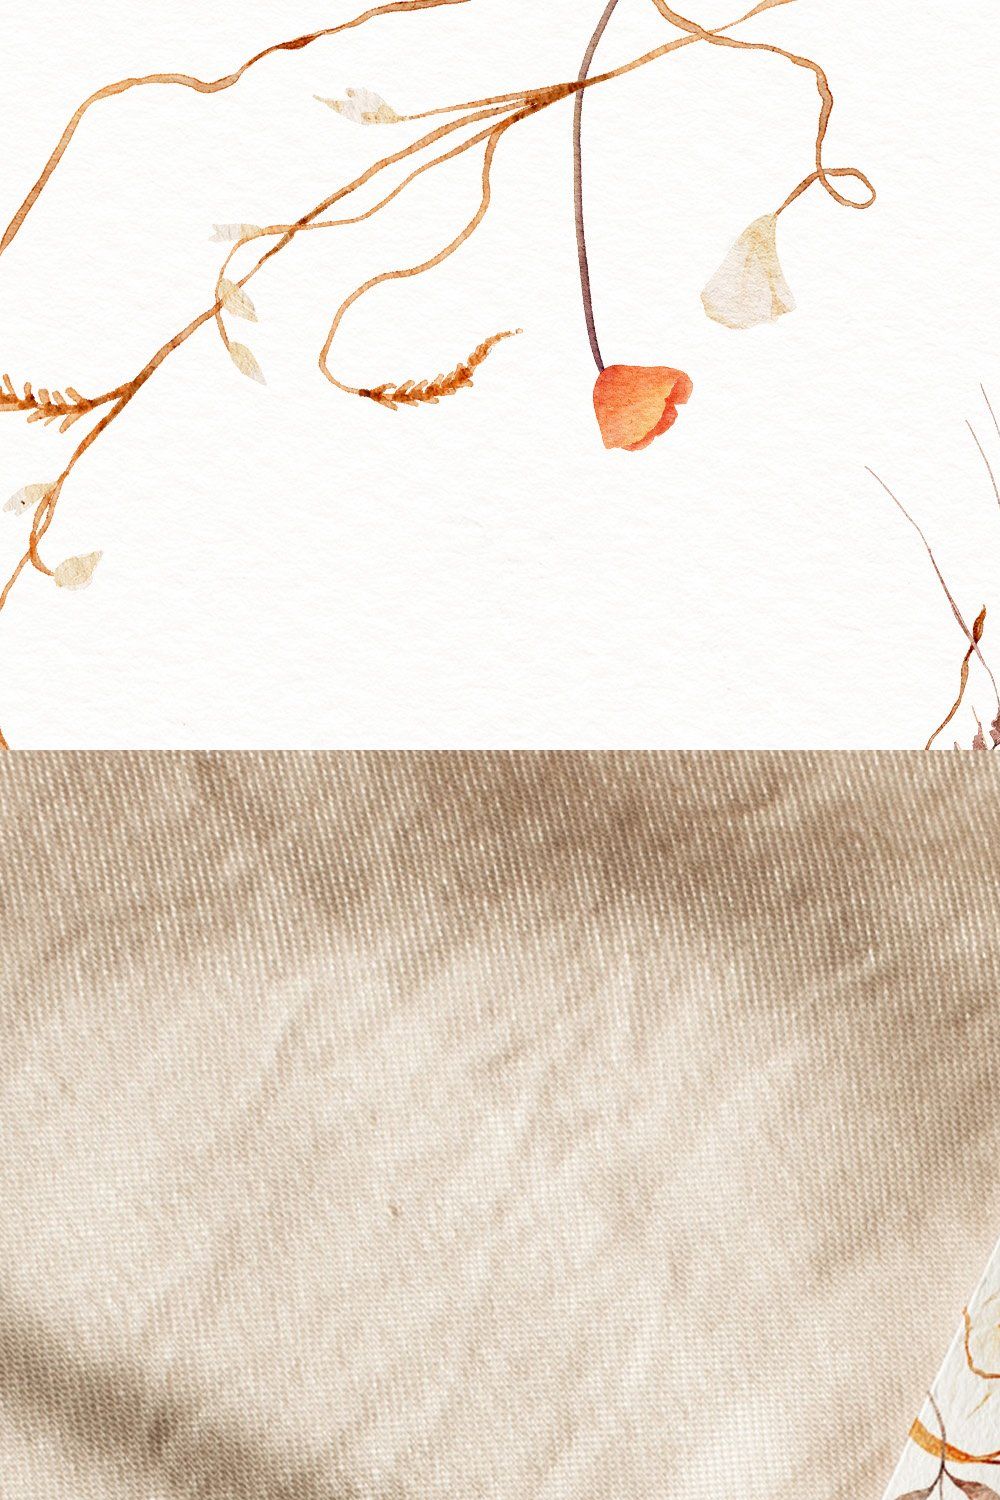 Delicate meadow watercolor Clipart pinterest preview image.